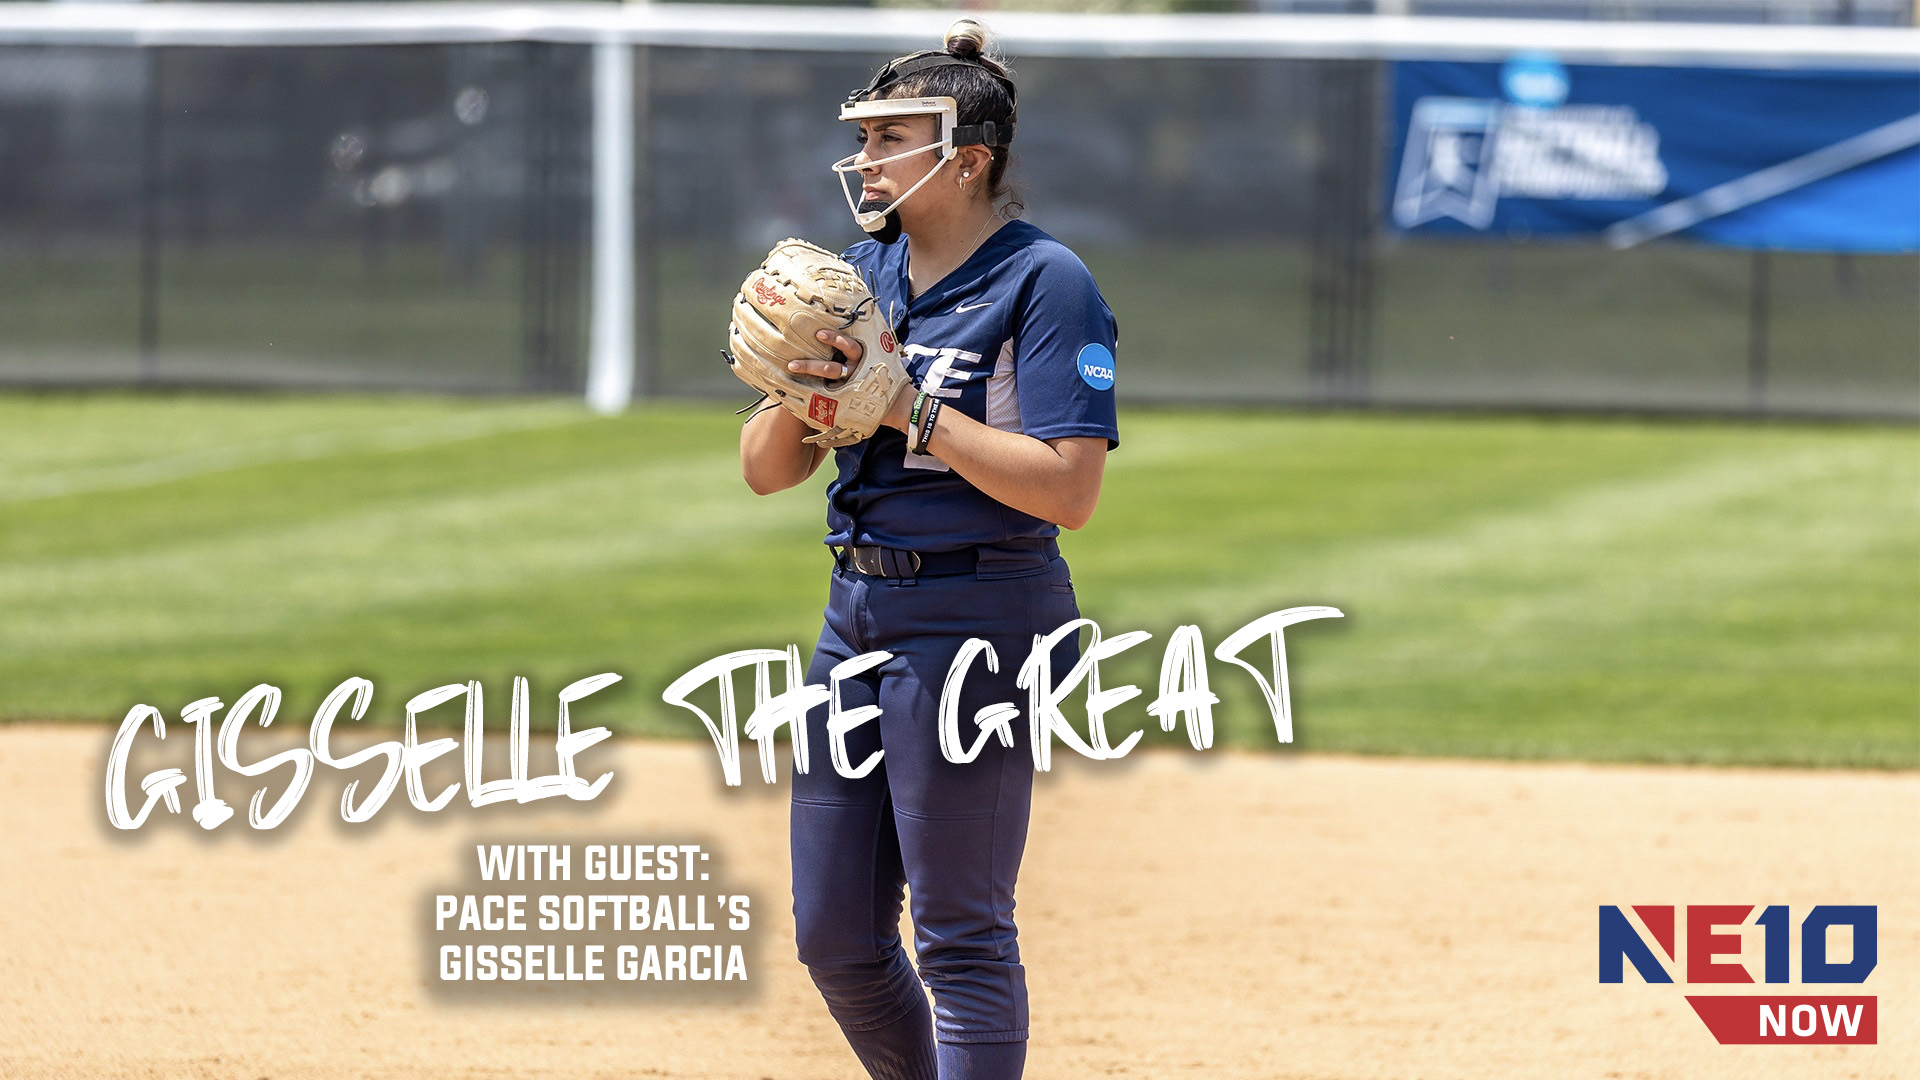 NE10 NOW The Podcast: Pace Softball's Gisselle Garcia